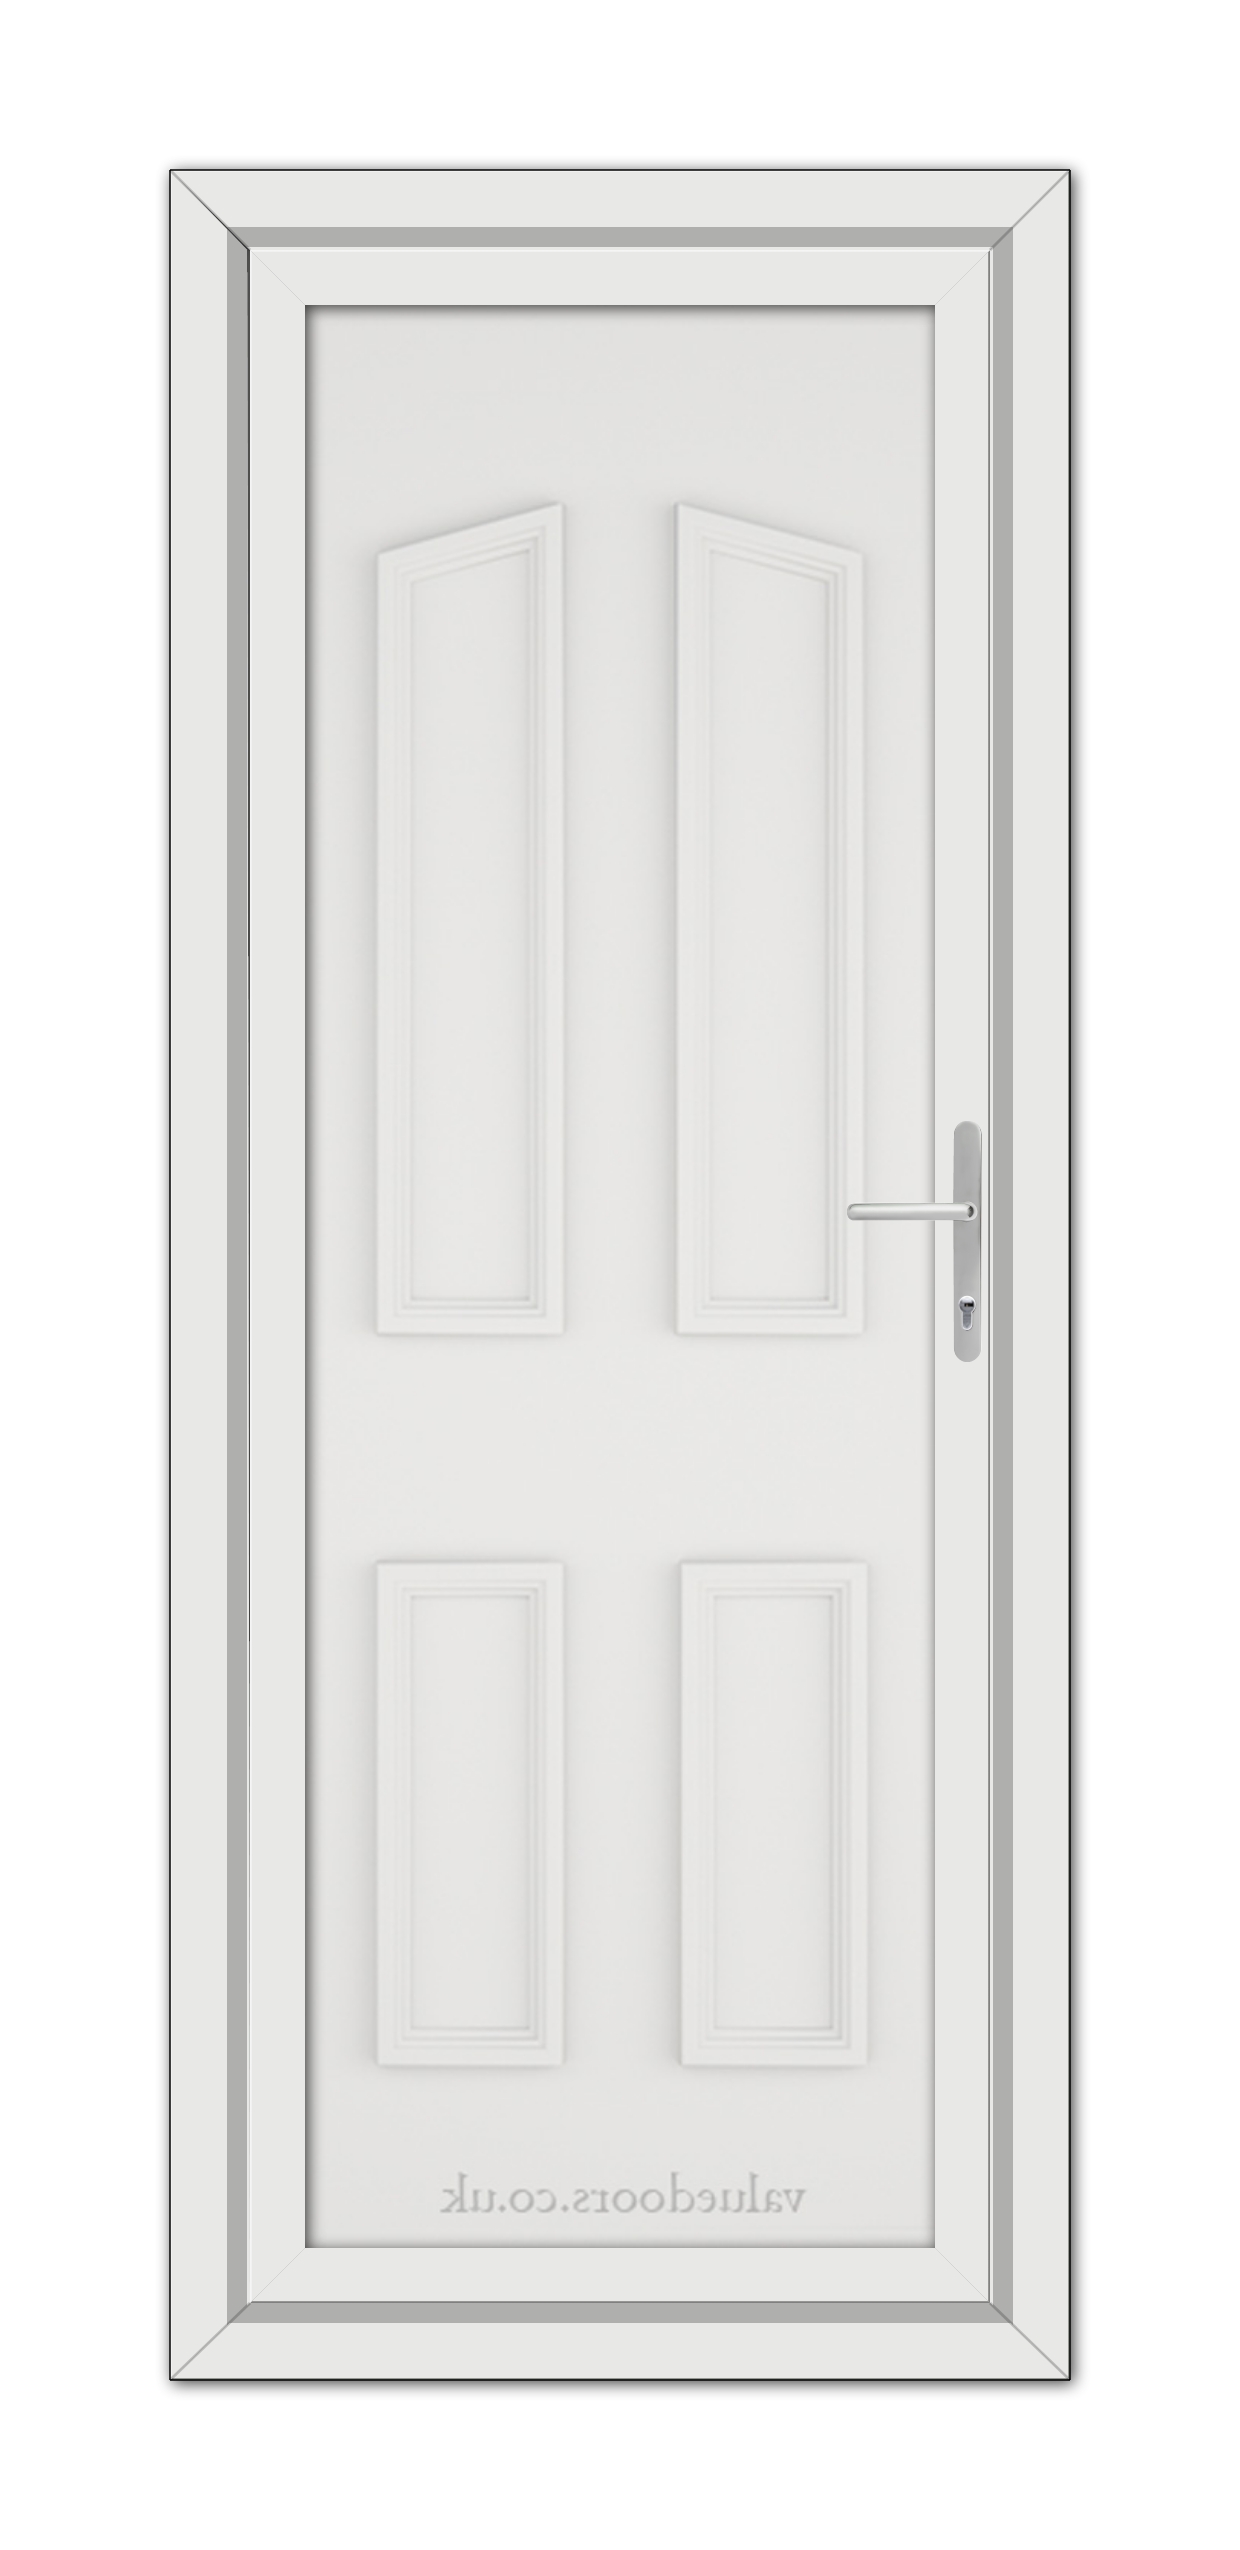 A White Kensington Solid uPVC Door with a silver handle, featuring a six-panel design set within a gray frame, viewed from the front.